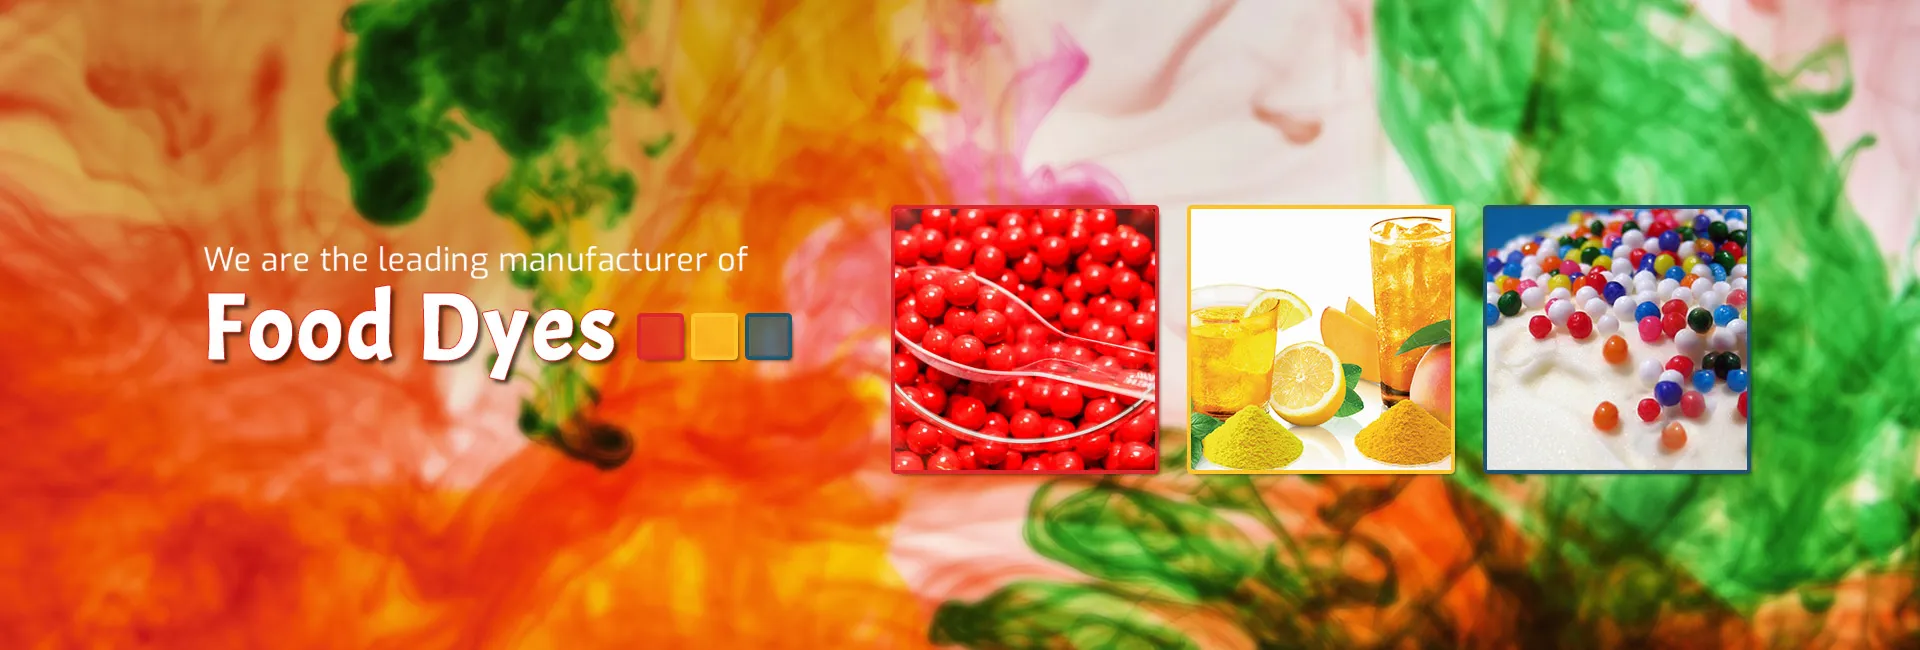 Food Dyes Manufacturer & Suppliers in Peru